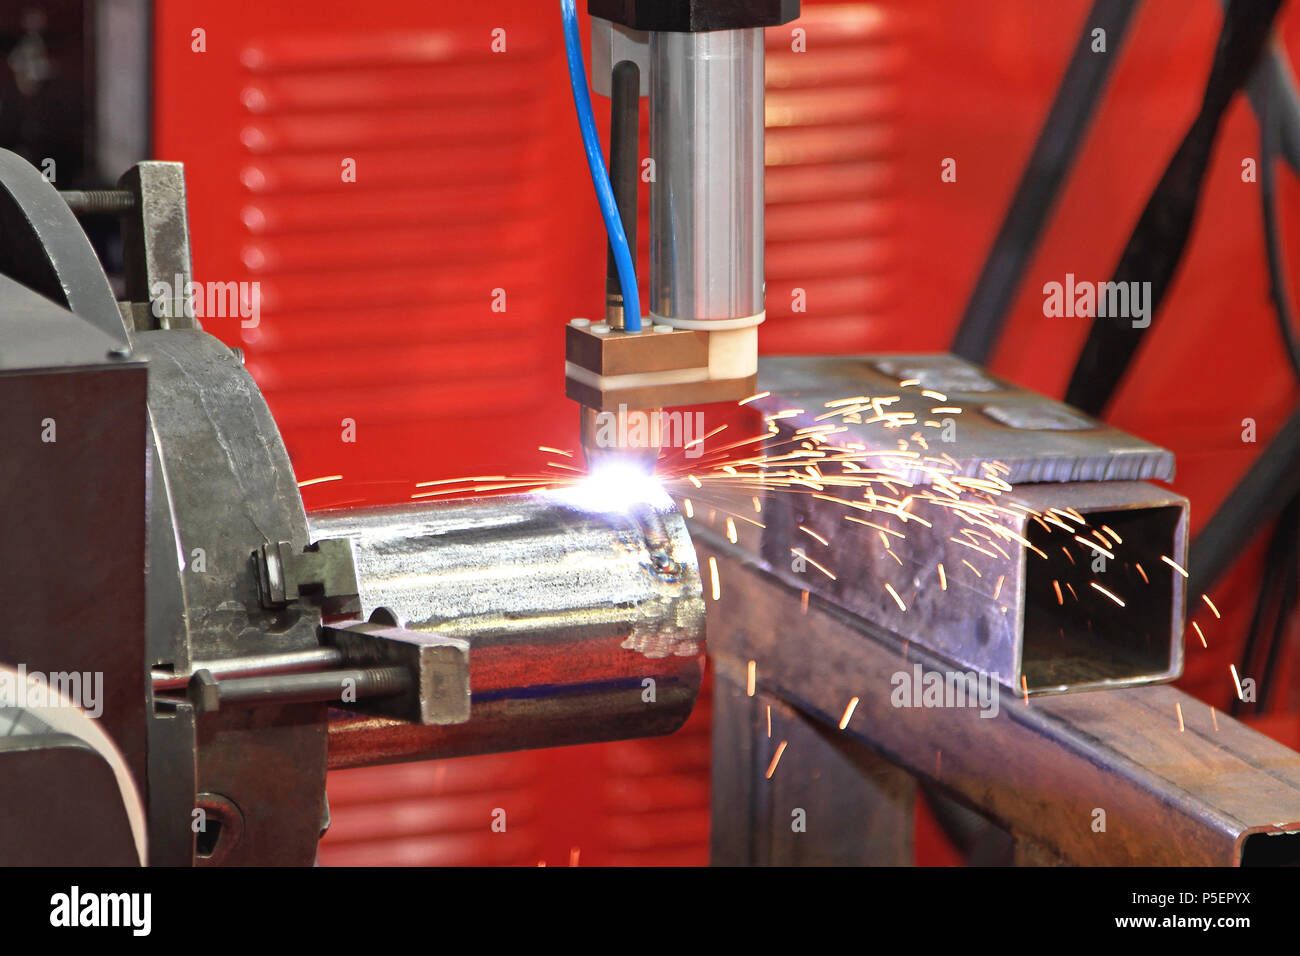 Automated Robot Welding Pipe in Factory Stock Photo